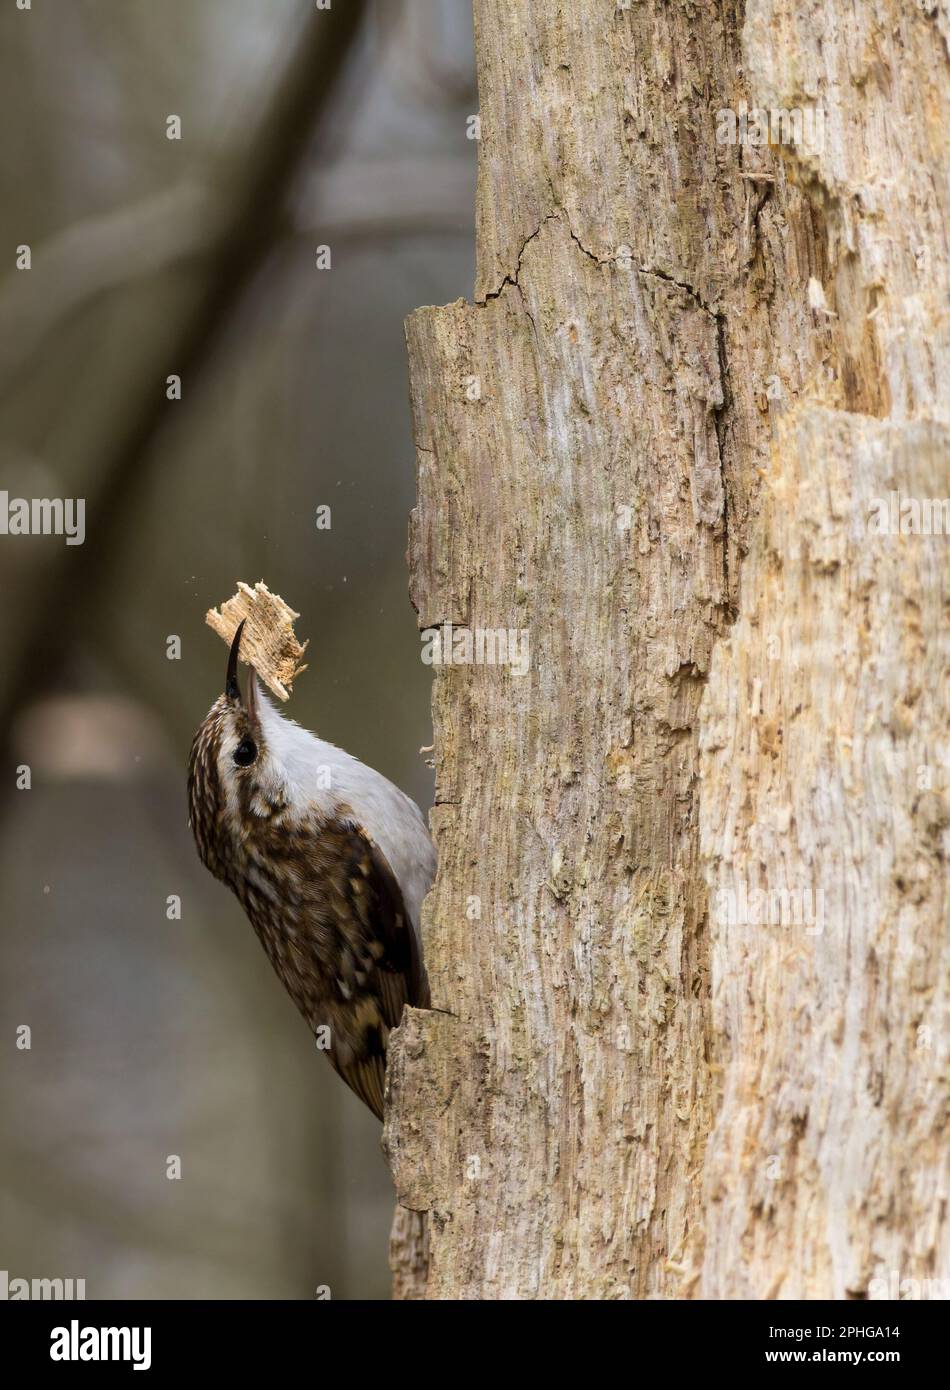 Treecreeper Certhia familiaris, with piece of bark large feet long down curved bill long stiff tail brown upperparts white underside white eye stripe Stock Photo